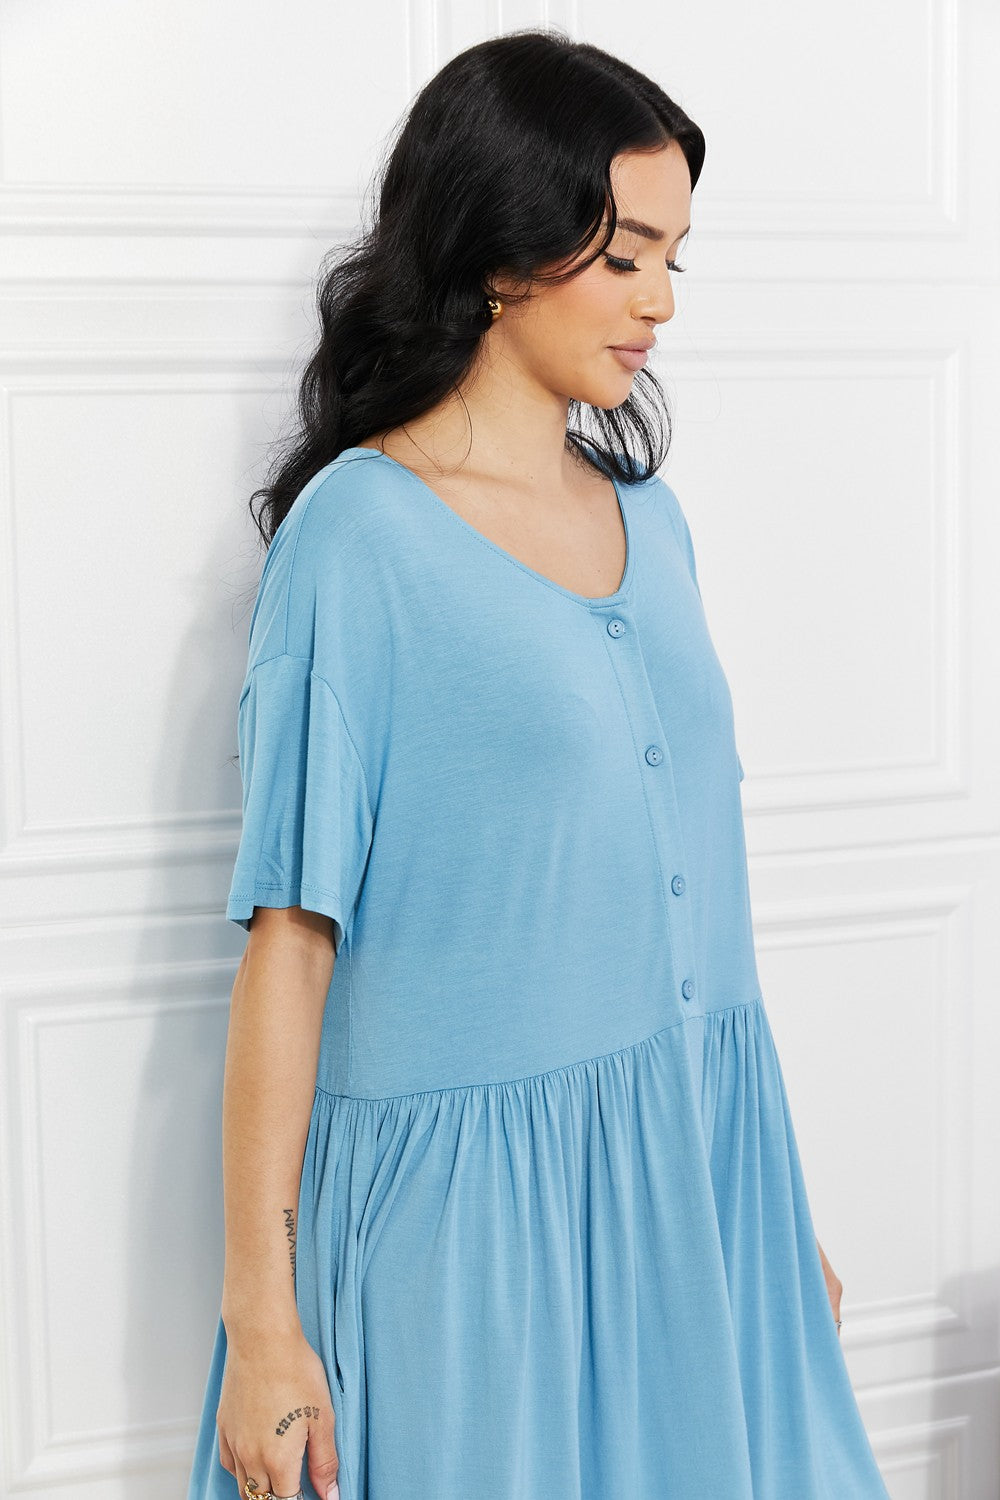 The Fernley: Sky Blue Button Up Flare Dress